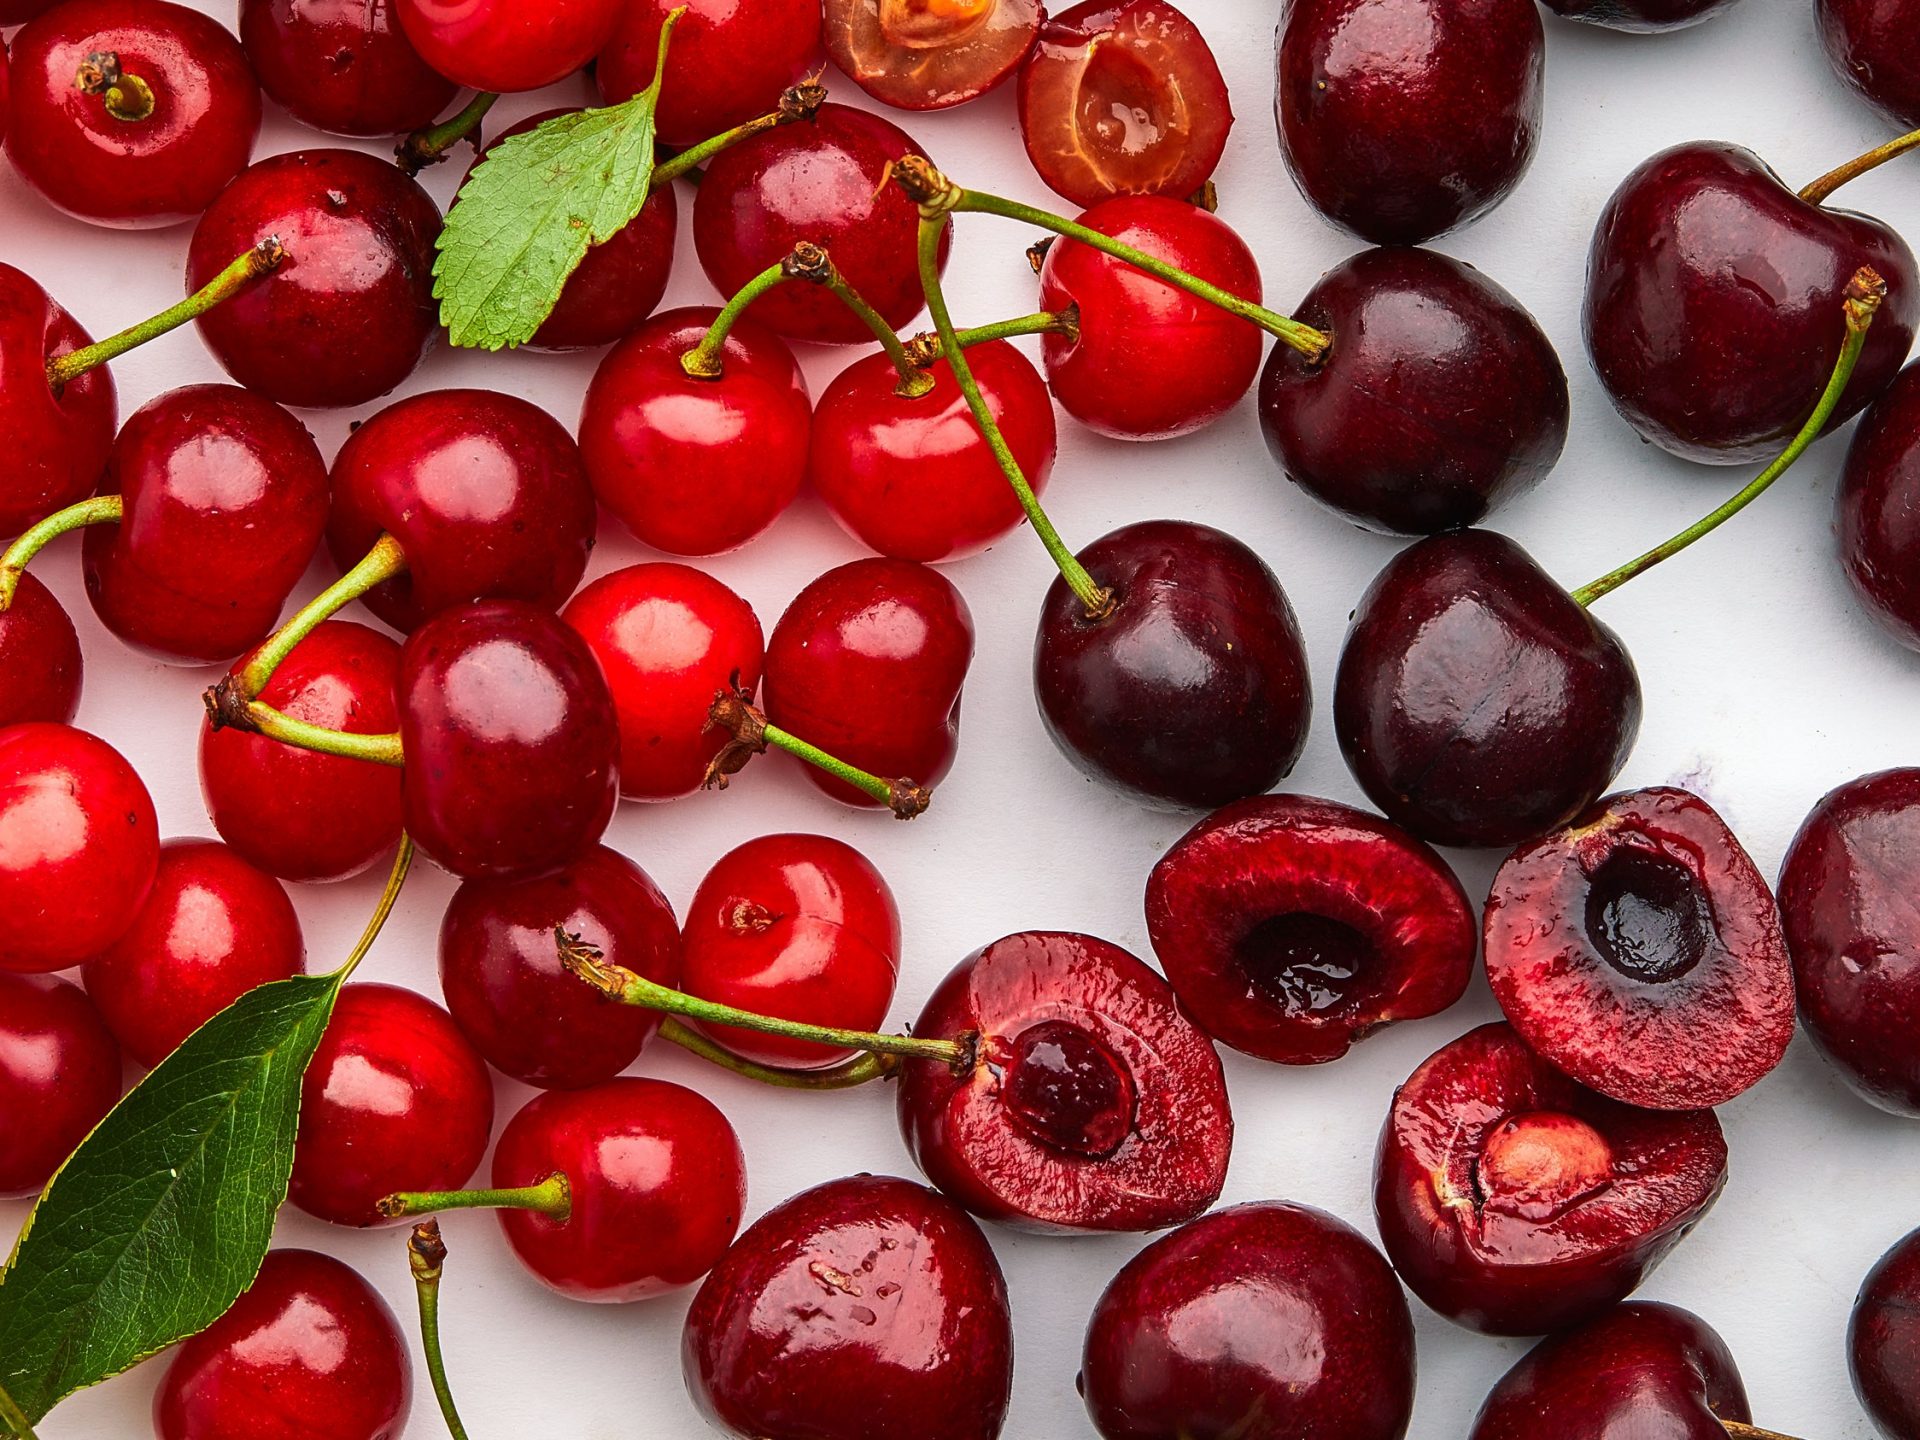 Can You Eat Too Many Cherries